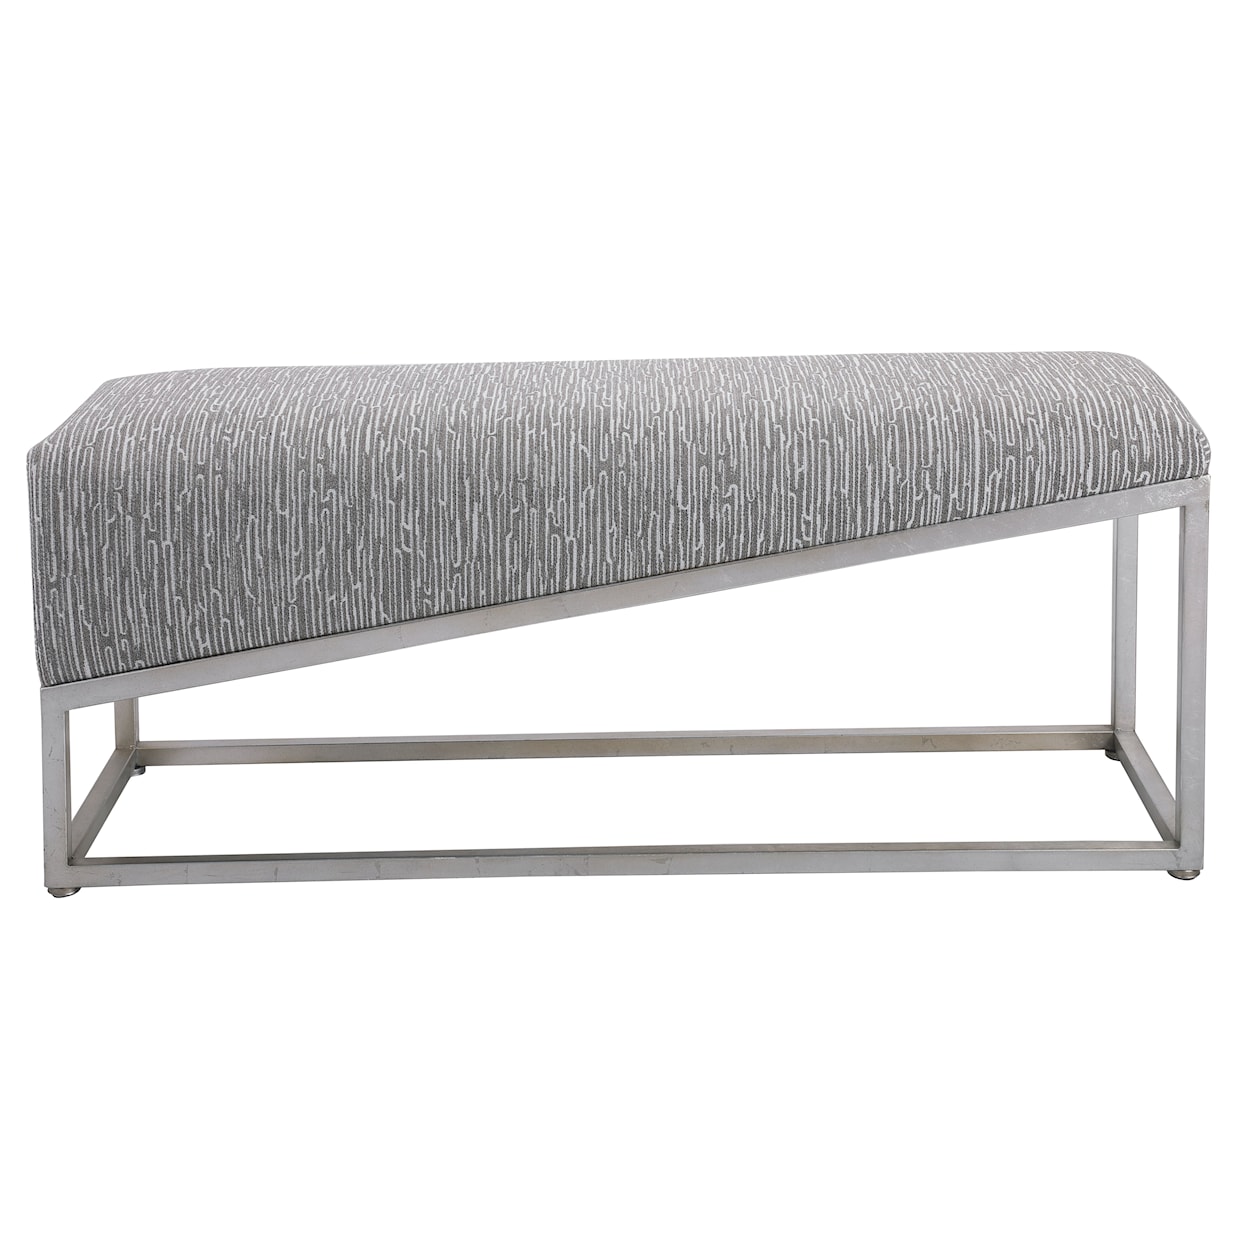 Uttermost Accent Furniture - Benches Uphill Climb Bench